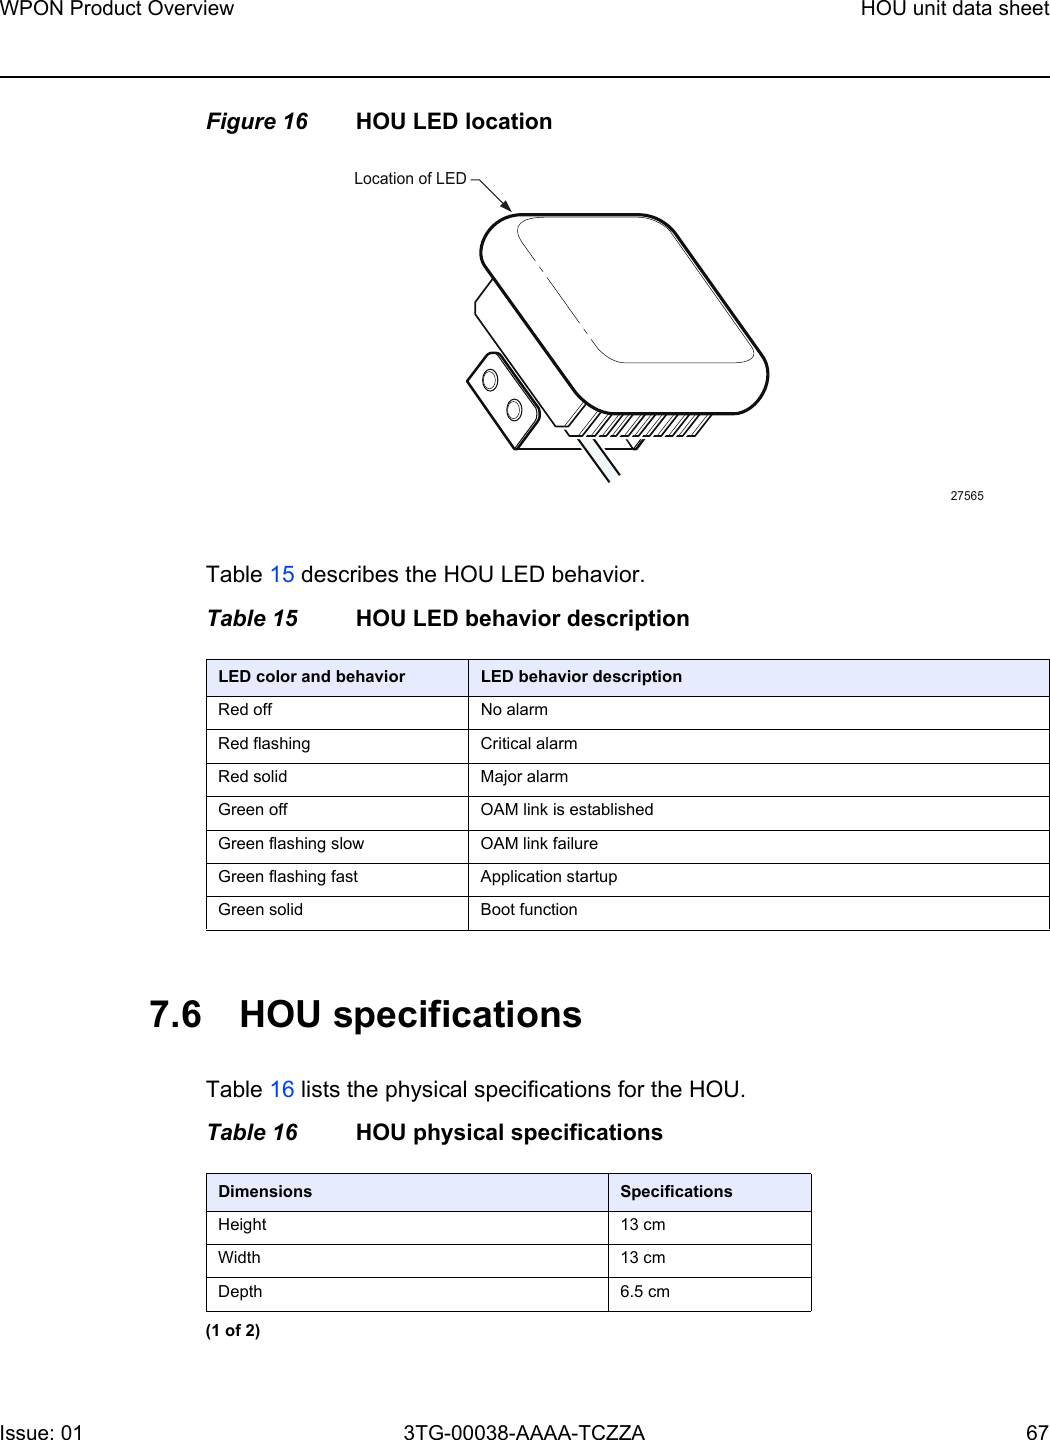 WPON Product Overview HOU unit data sheetIssue: 01 3TG-00038-AAAA-TCZZA 67 Figure 16 HOU LED locationTable 15 describes the HOU LED behavior. Table 15 HOU LED behavior description7.6 HOU specificationsTable 16 lists the physical specifications for the HOU. Table 16 HOU physical specificationsLED color and behavior LED behavior descriptionRed off No alarm Red flashing Critical alarmRed solid Major alarmGreen off OAM link is established Green flashing slow OAM link failureGreen flashing fast Application startup Green solid Boot function27565Location of LEDDimensions SpecificationsHeight 13 cmWidth 13 cmDepth 6.5 cm(1 of 2)